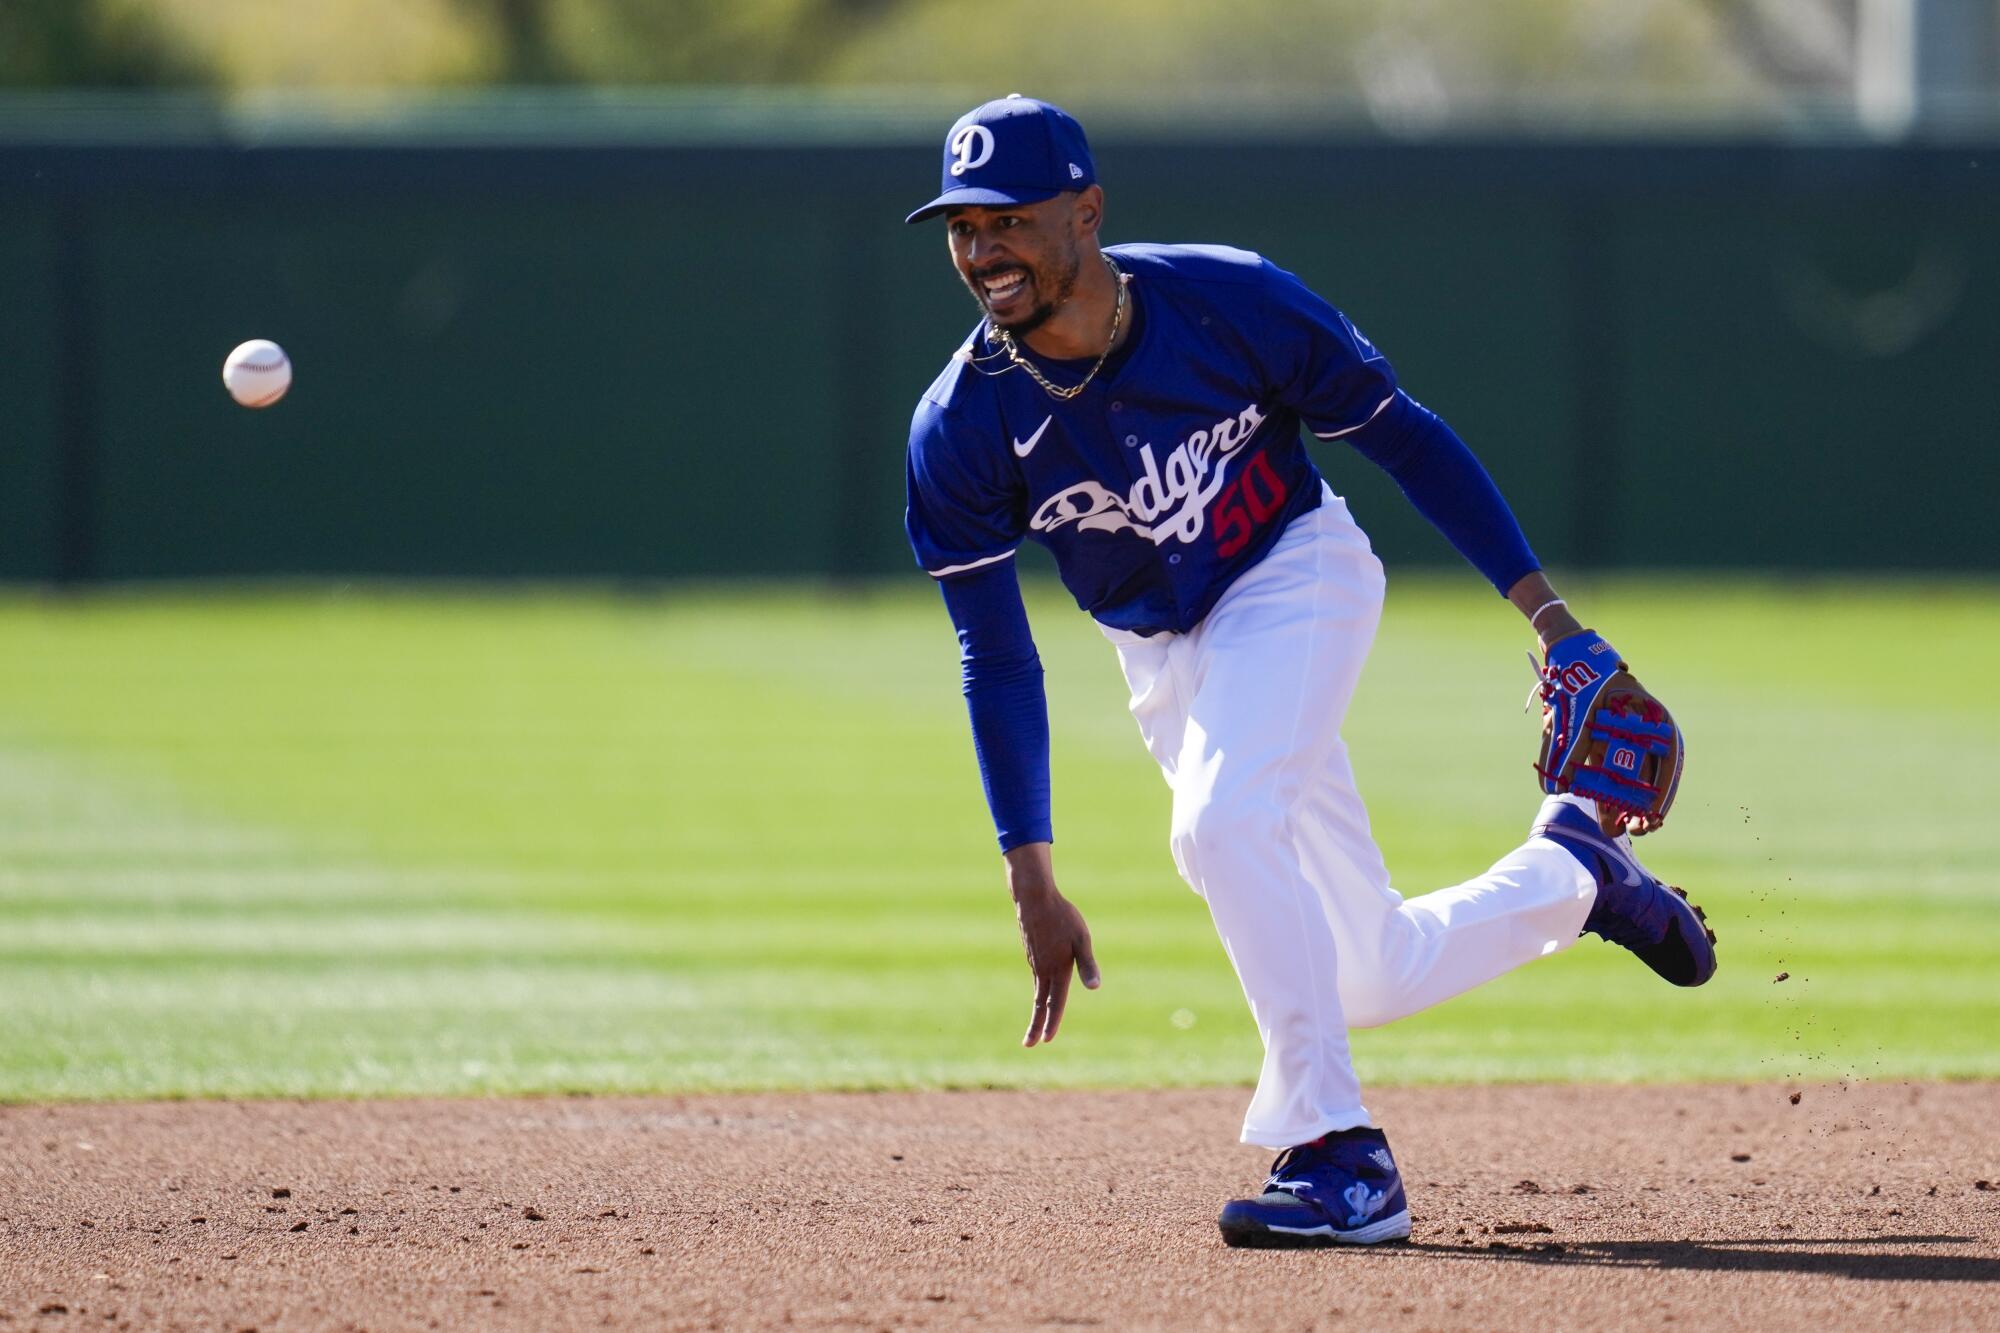 The Dodgers' Mookie Betts runs toward the ball during a spring training workout at Camelback Ranch in Phoenix on Feb. 14